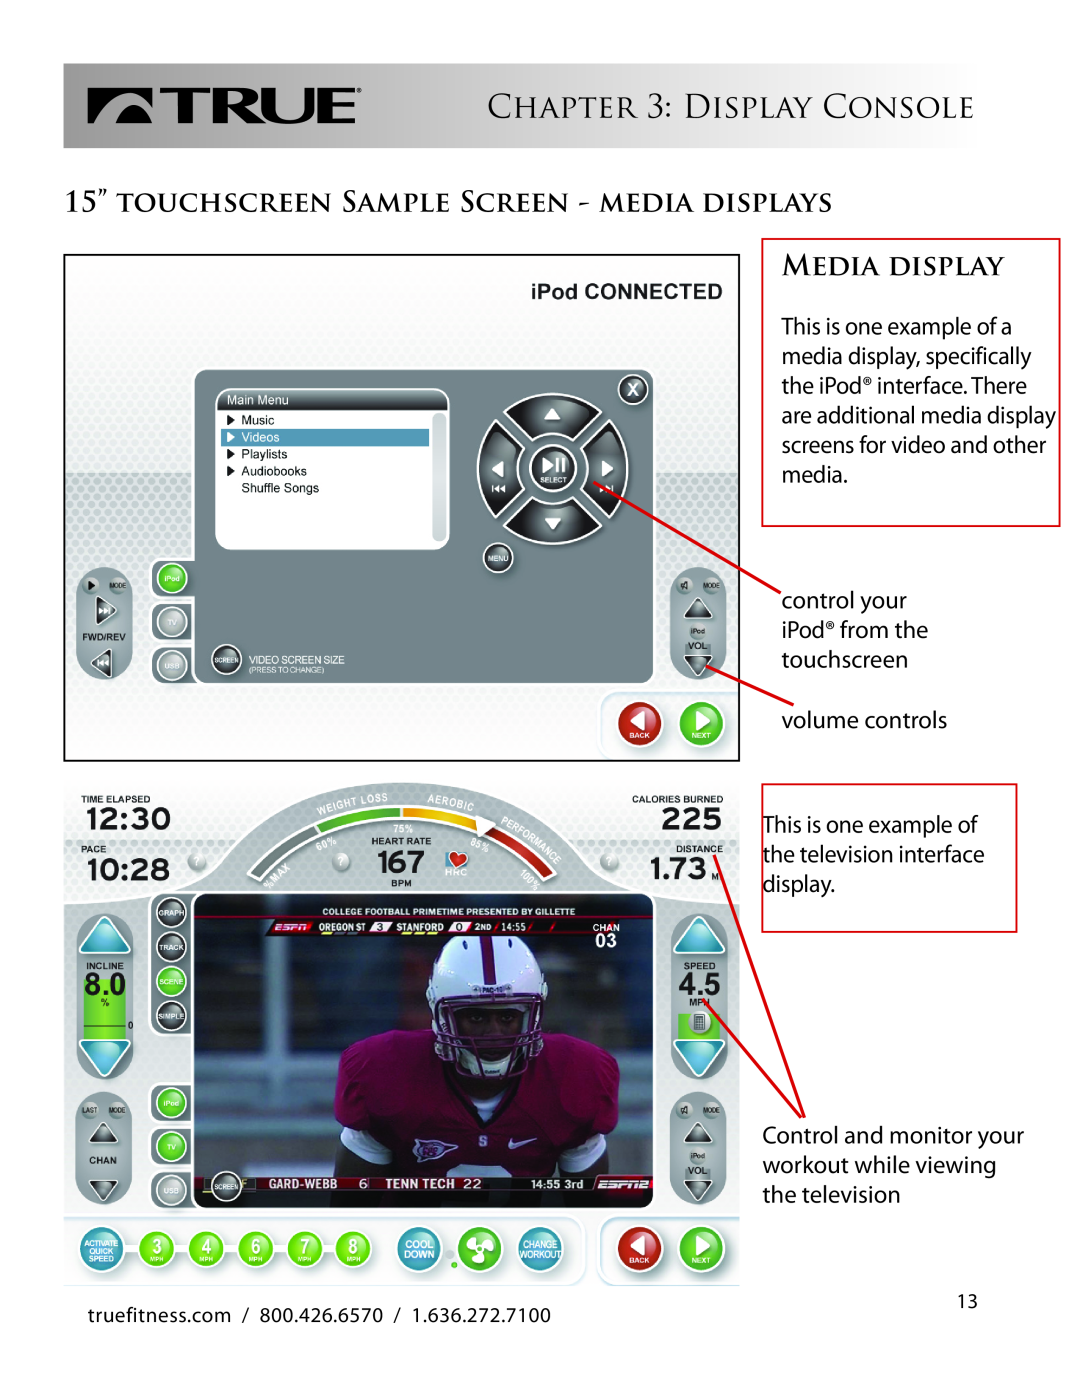 True Fitness CS800 manual volume controls, This is one example of the television interface display, Display Console 